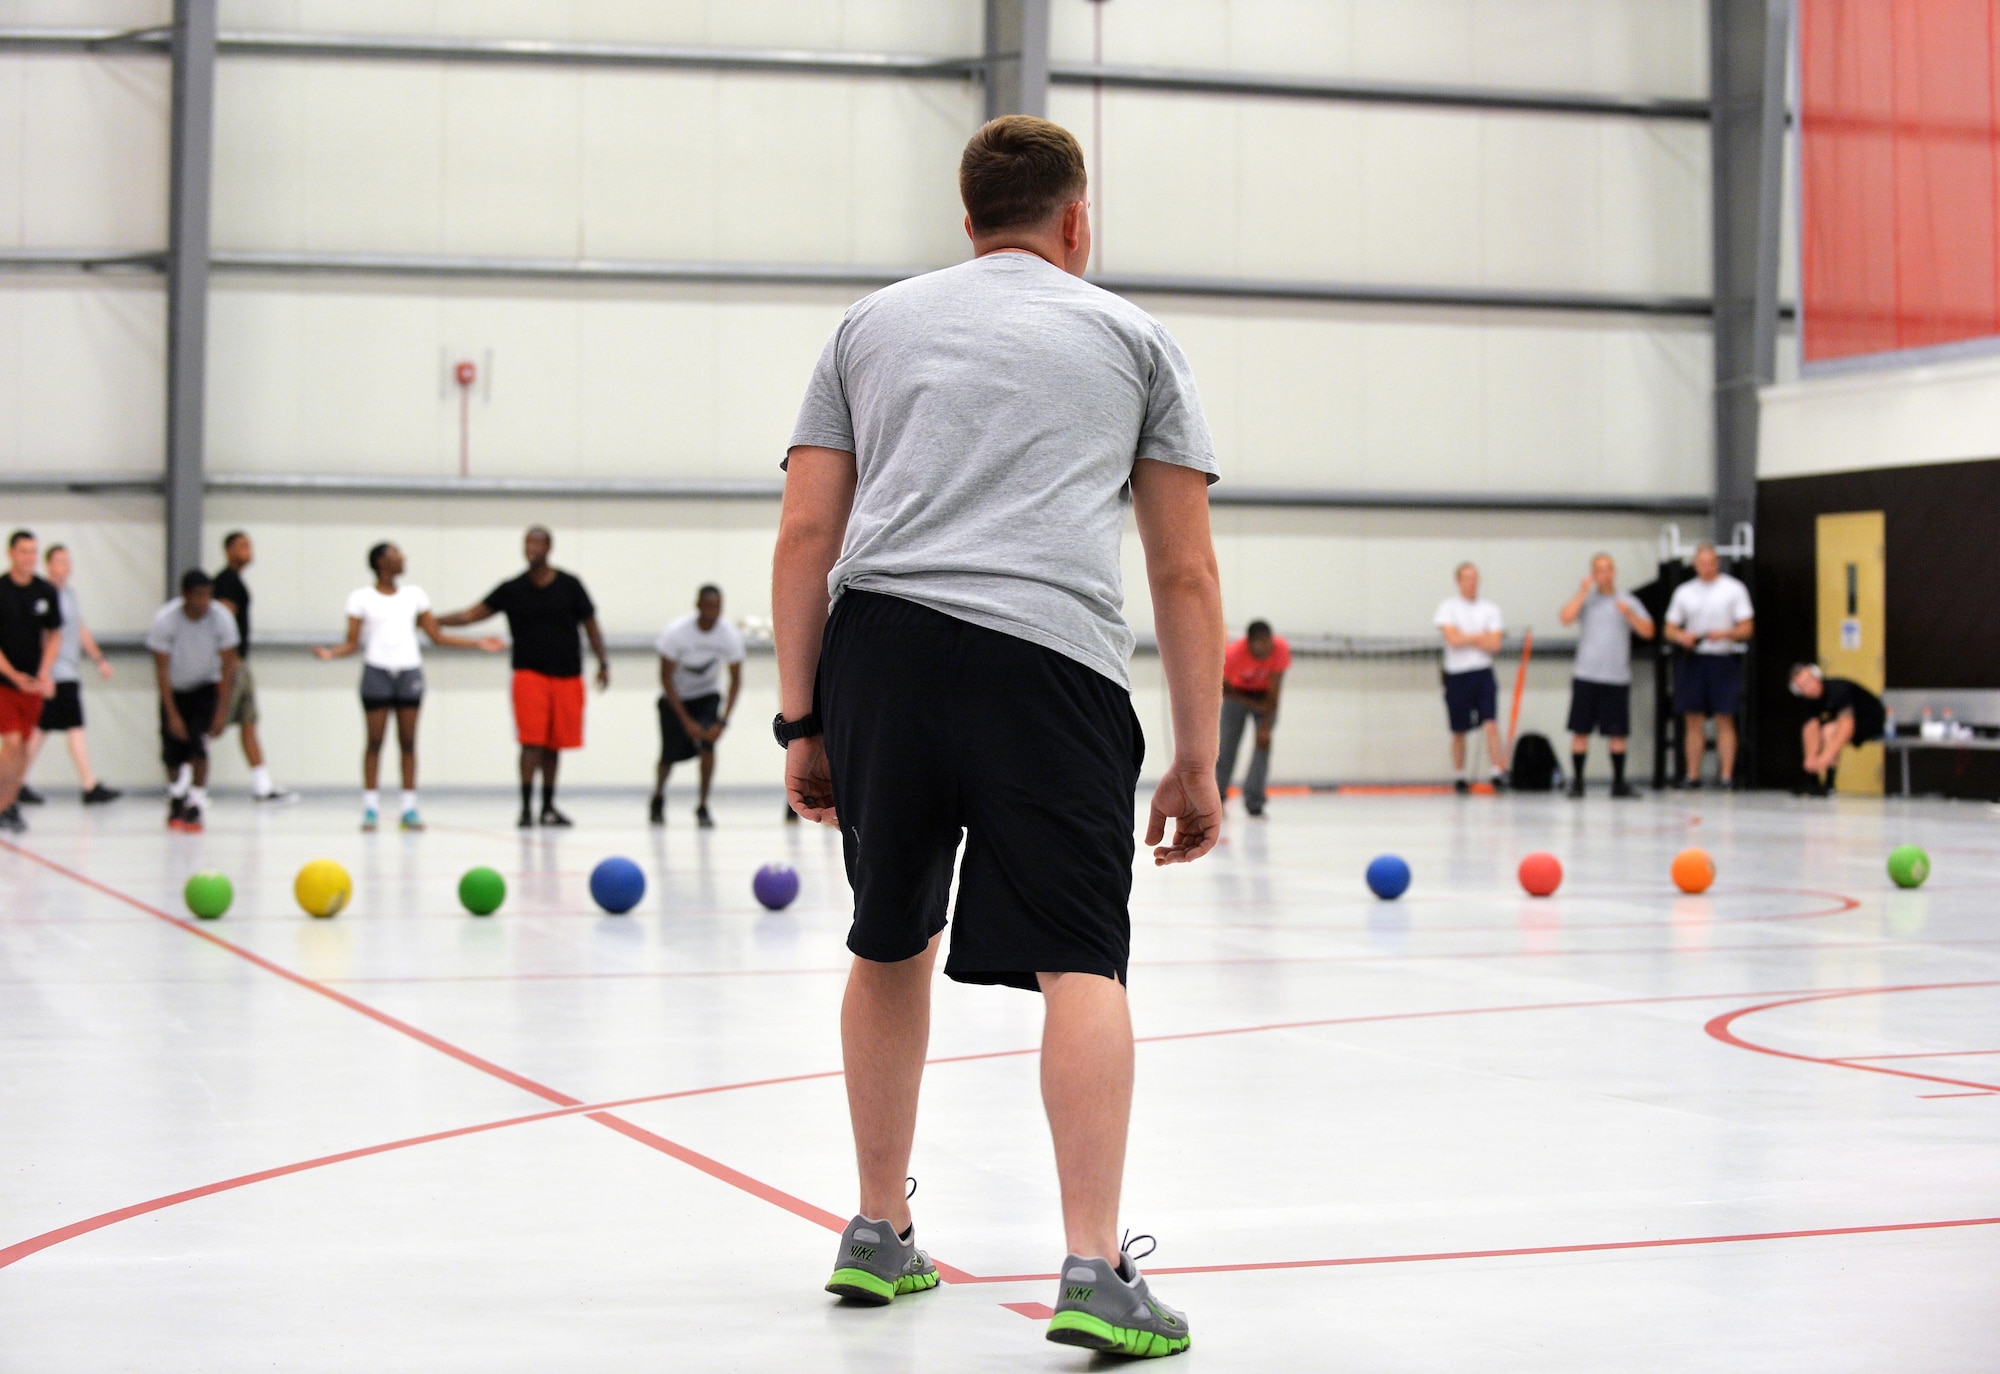 Two teams prepare to make a dash for dodgeballs at an undisclosed location in Southwest Asia June 13, 2015. The dodgeball tournament was one of the five sports played during a two-day span to celebrate the U.S. Army’s 240th birthday. (U.S. Air Force photo/Tech. Sgt. Jeff Andrejcik)